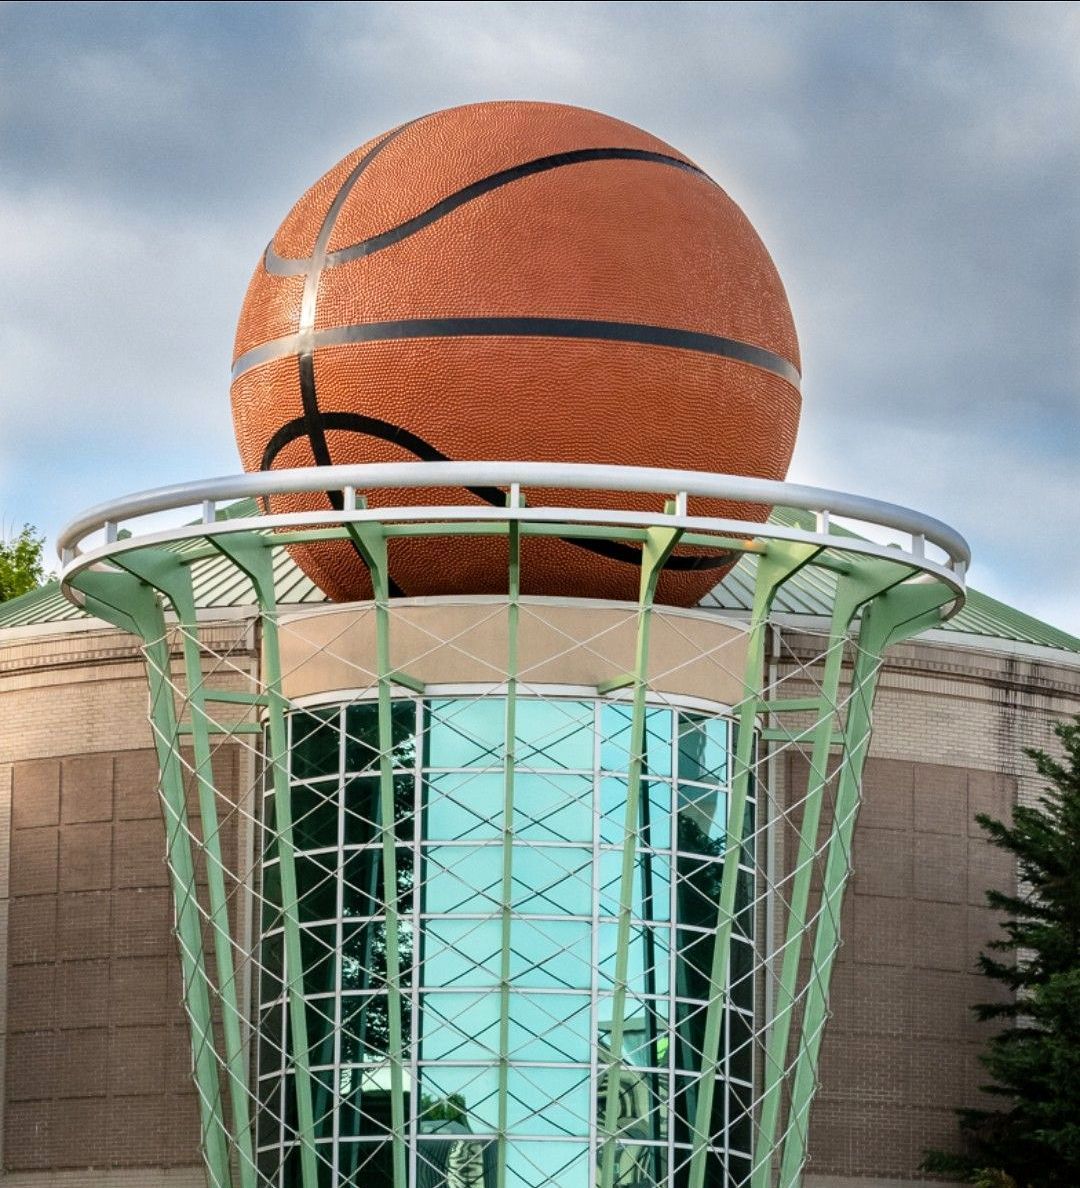  World’s Largest Basketball Sculpture: world record in Knoxville, Tennessee 